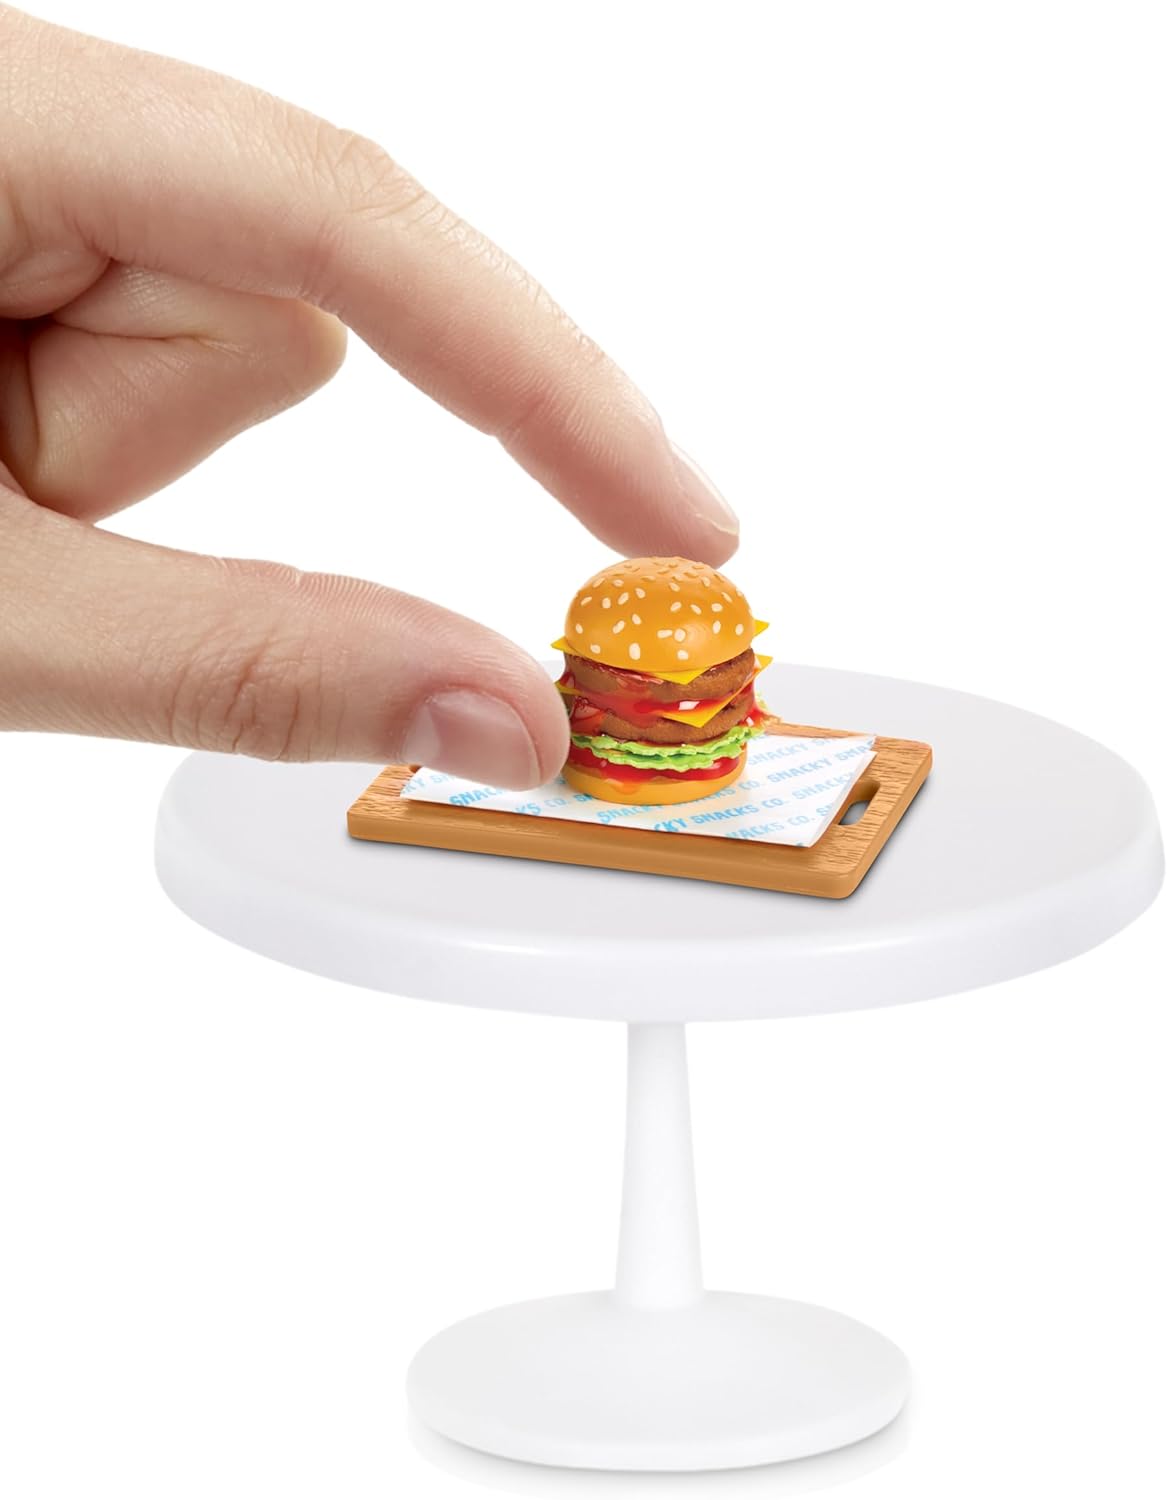 Make It Mini Food Diner Series 3 Mini Collectibles - MGA's Miniverse, Blind Packaging, DIY, Resin Play, Replica Food, NOT Edible, Collectors, 8+(Multi Color)